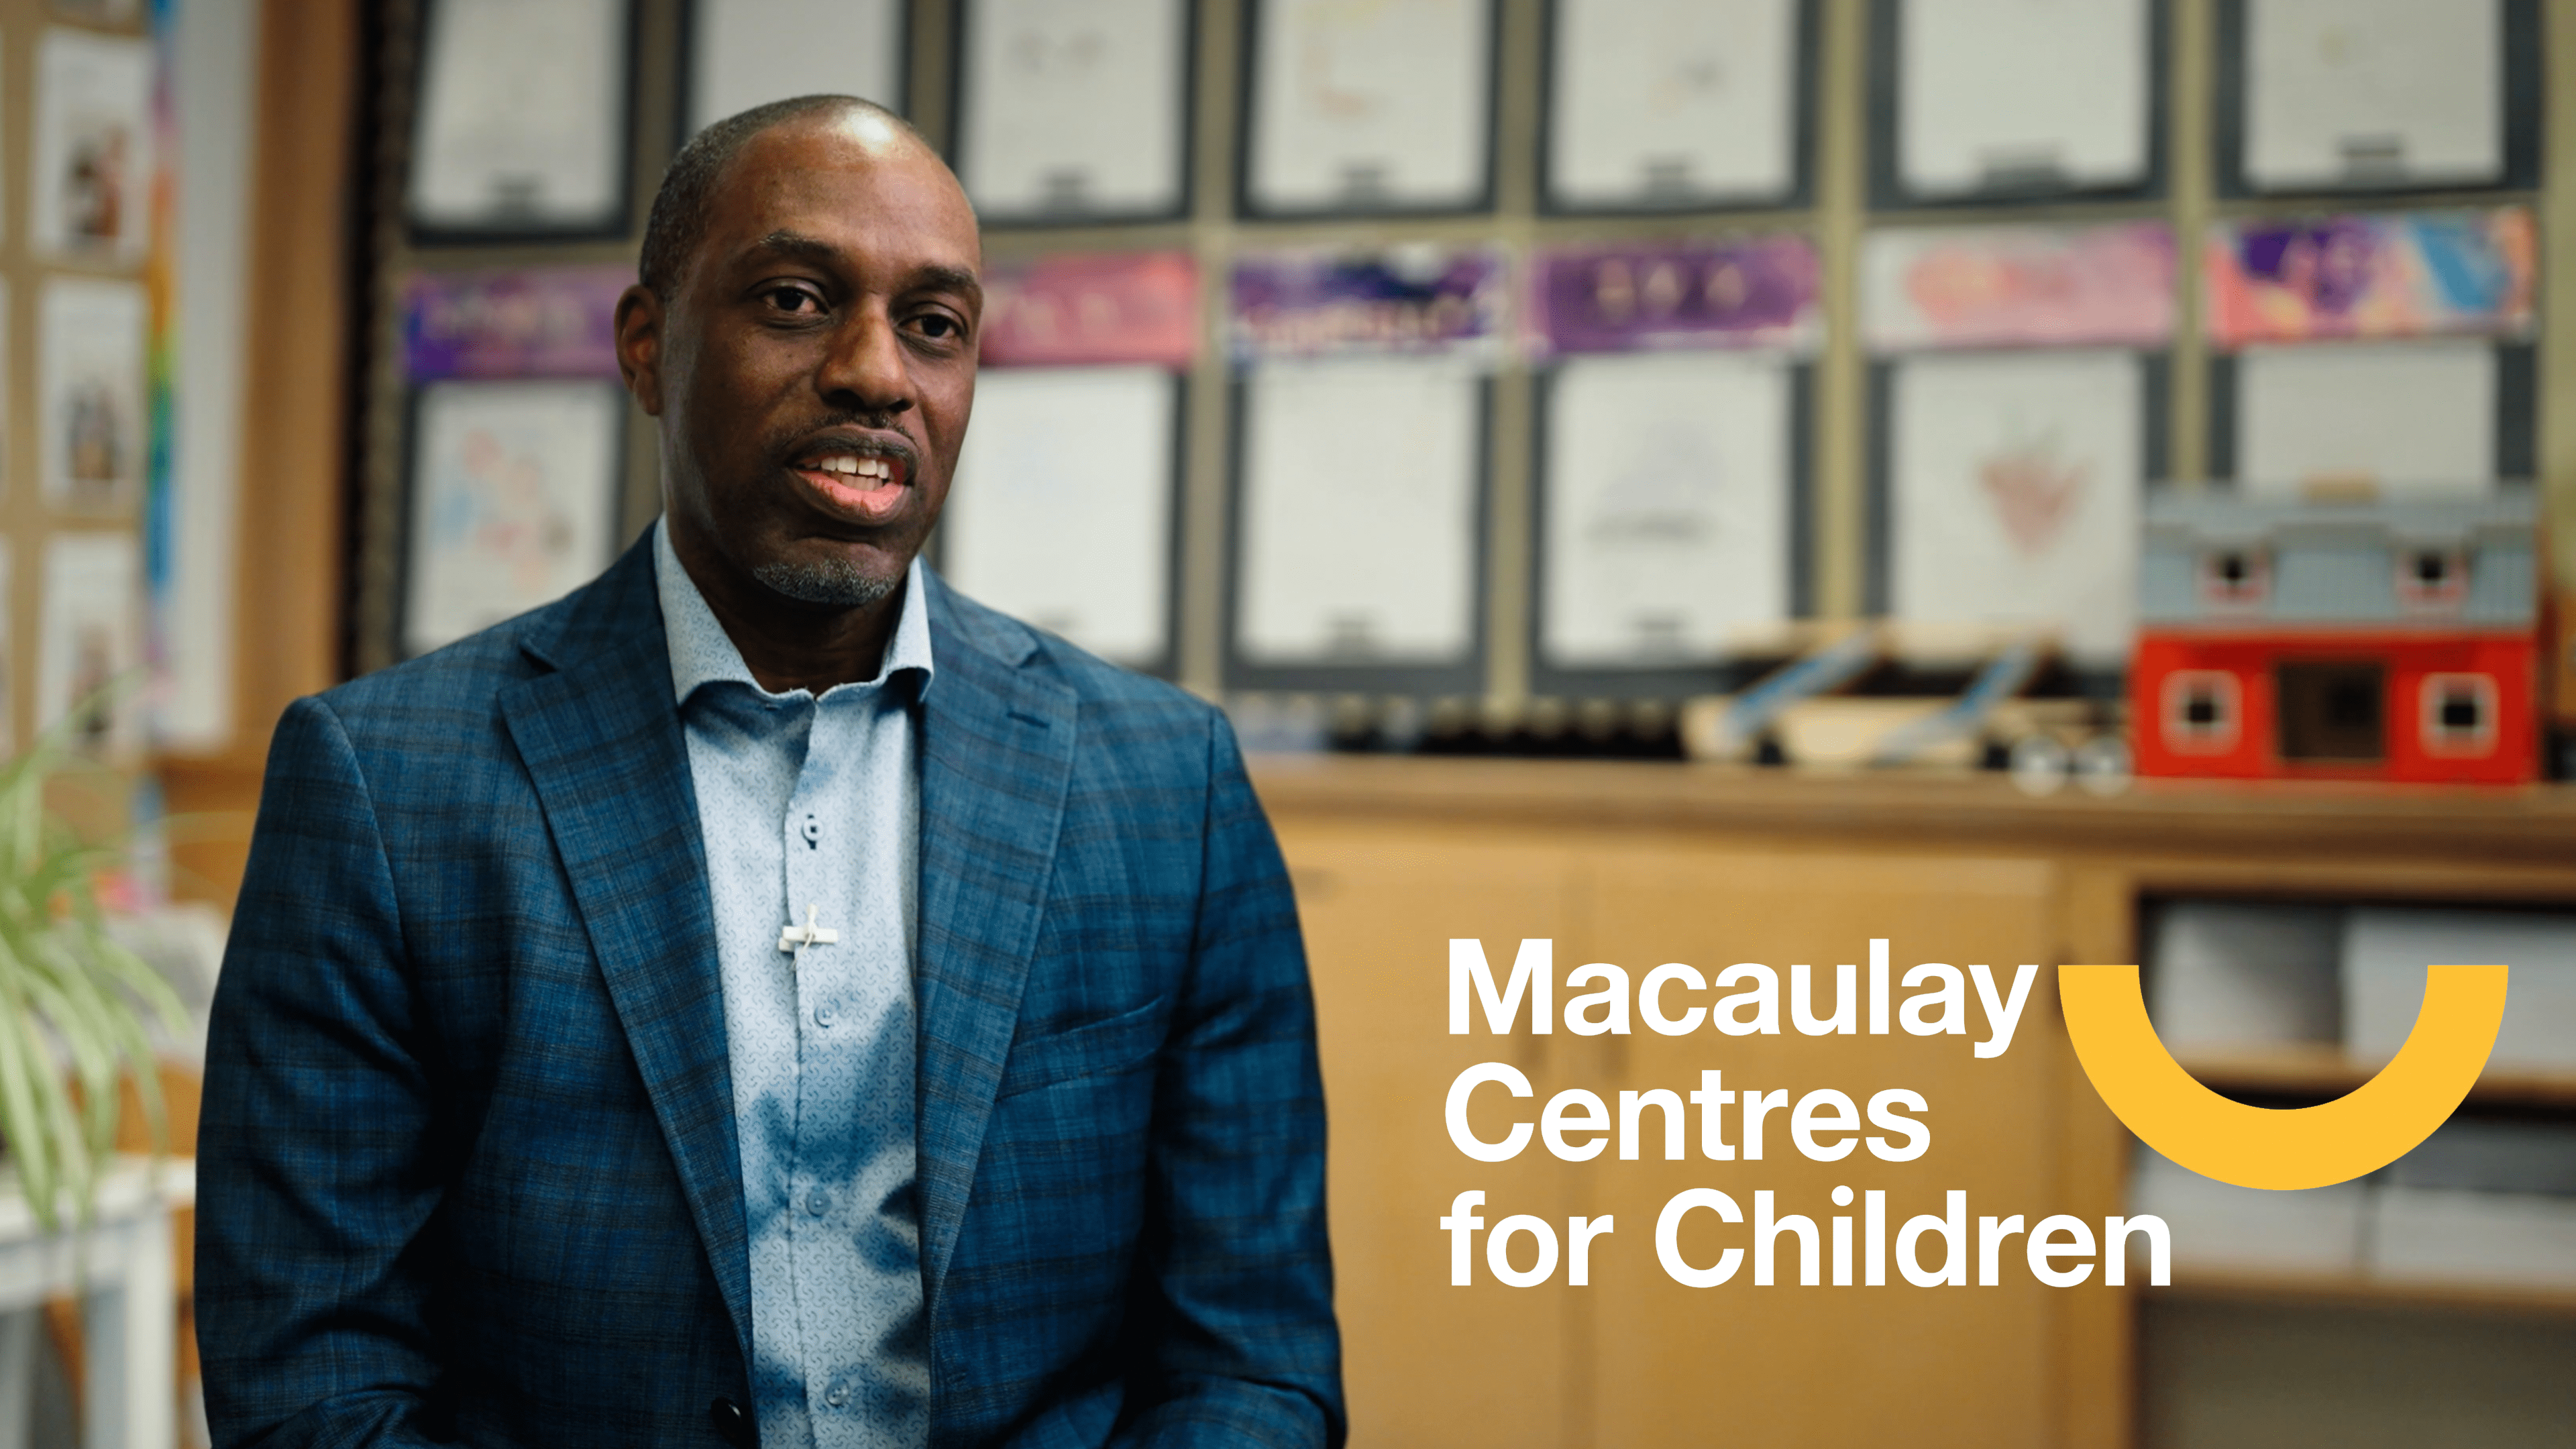 Macaulay Centres For Children / “A Second Family”